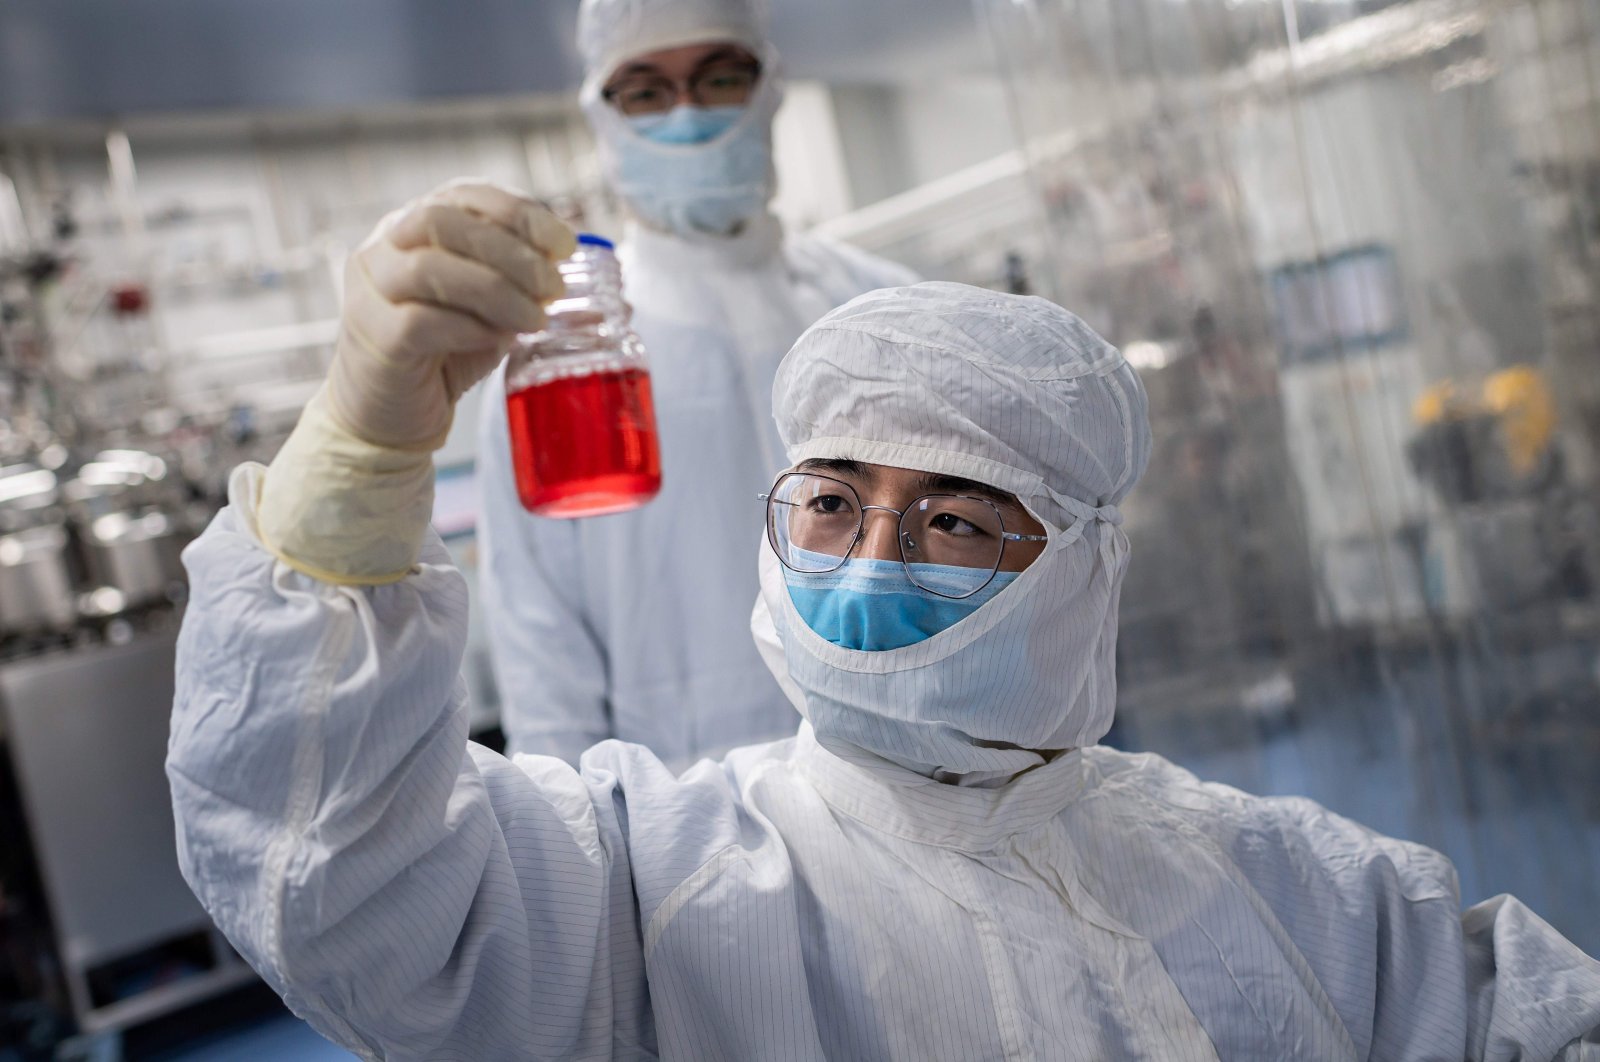 An engineer looks at monkey kidney cells as he tests an experimental vaccine for COVID-19 inside the Cells Culture Room laboratory at the Sinovac Biotech facilities in Beijing, China on April 29, 2020. (AFP Photo)